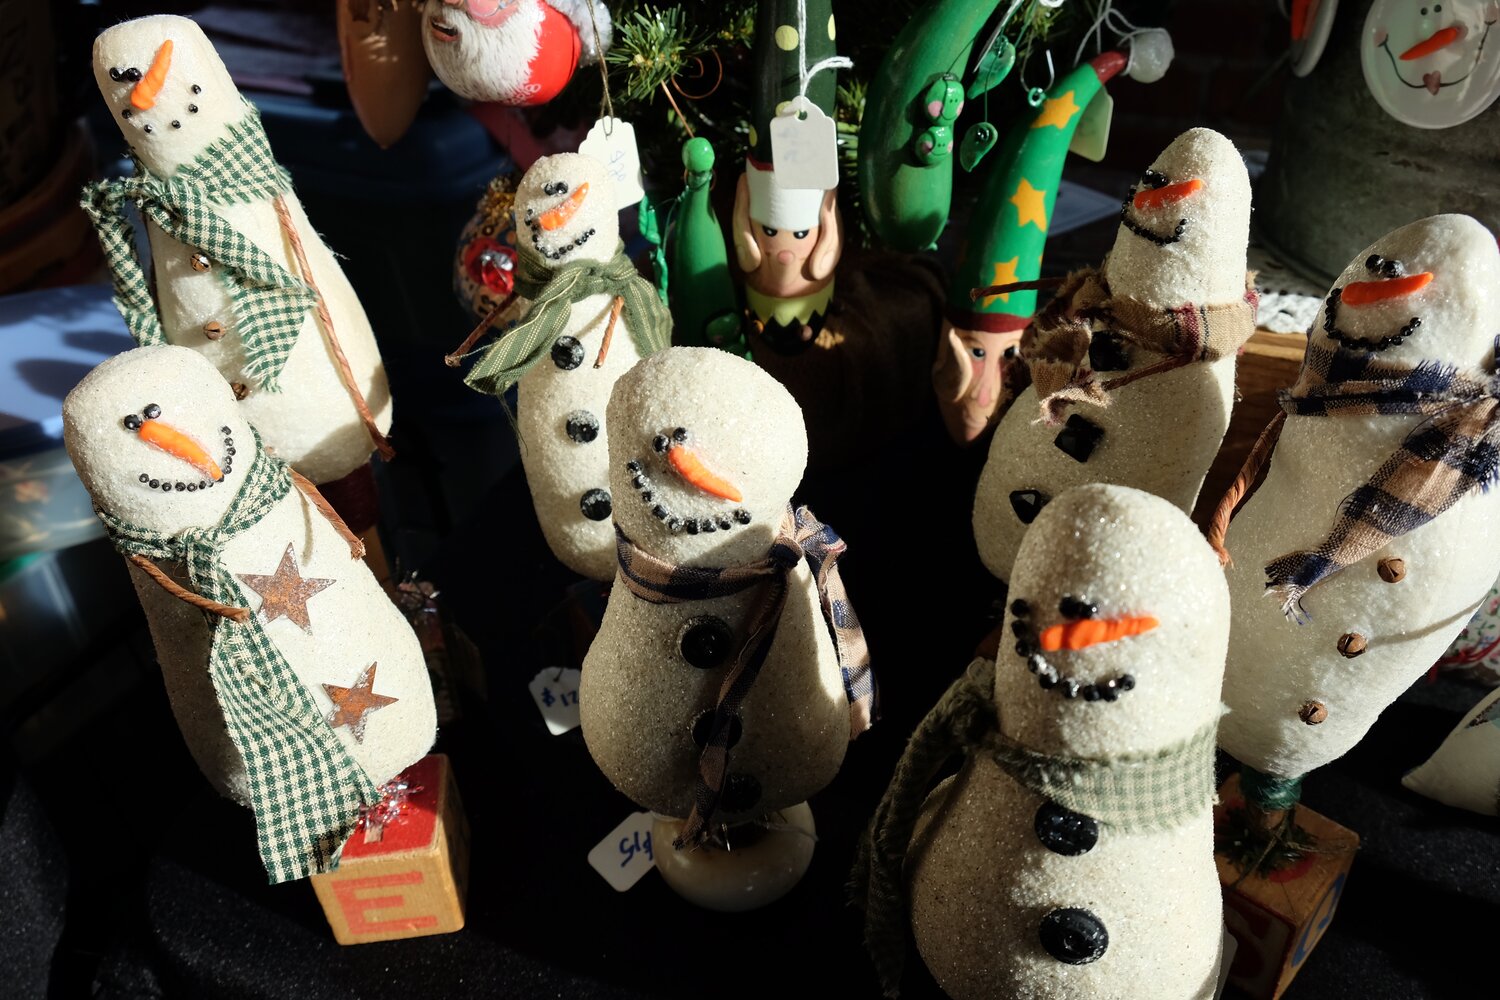 Just in case there isn't snow on hand, you can pick up a small snowman at The Cooperage's Holiday Artisans' Market in Honesdale, PA.